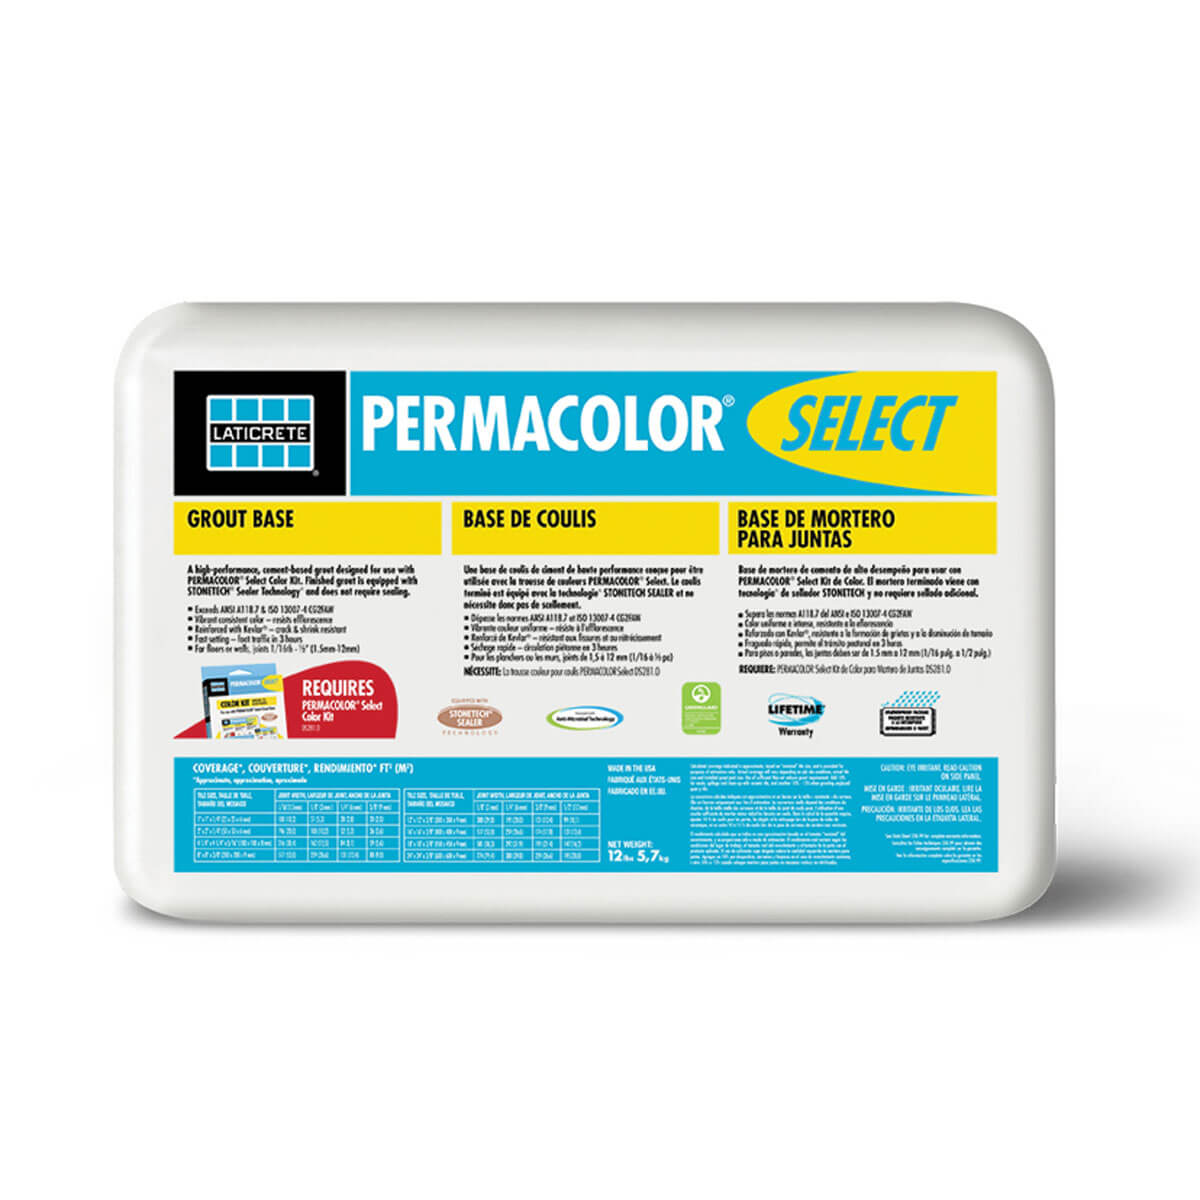 Laticrete PERMACOLOR Select Grout Base